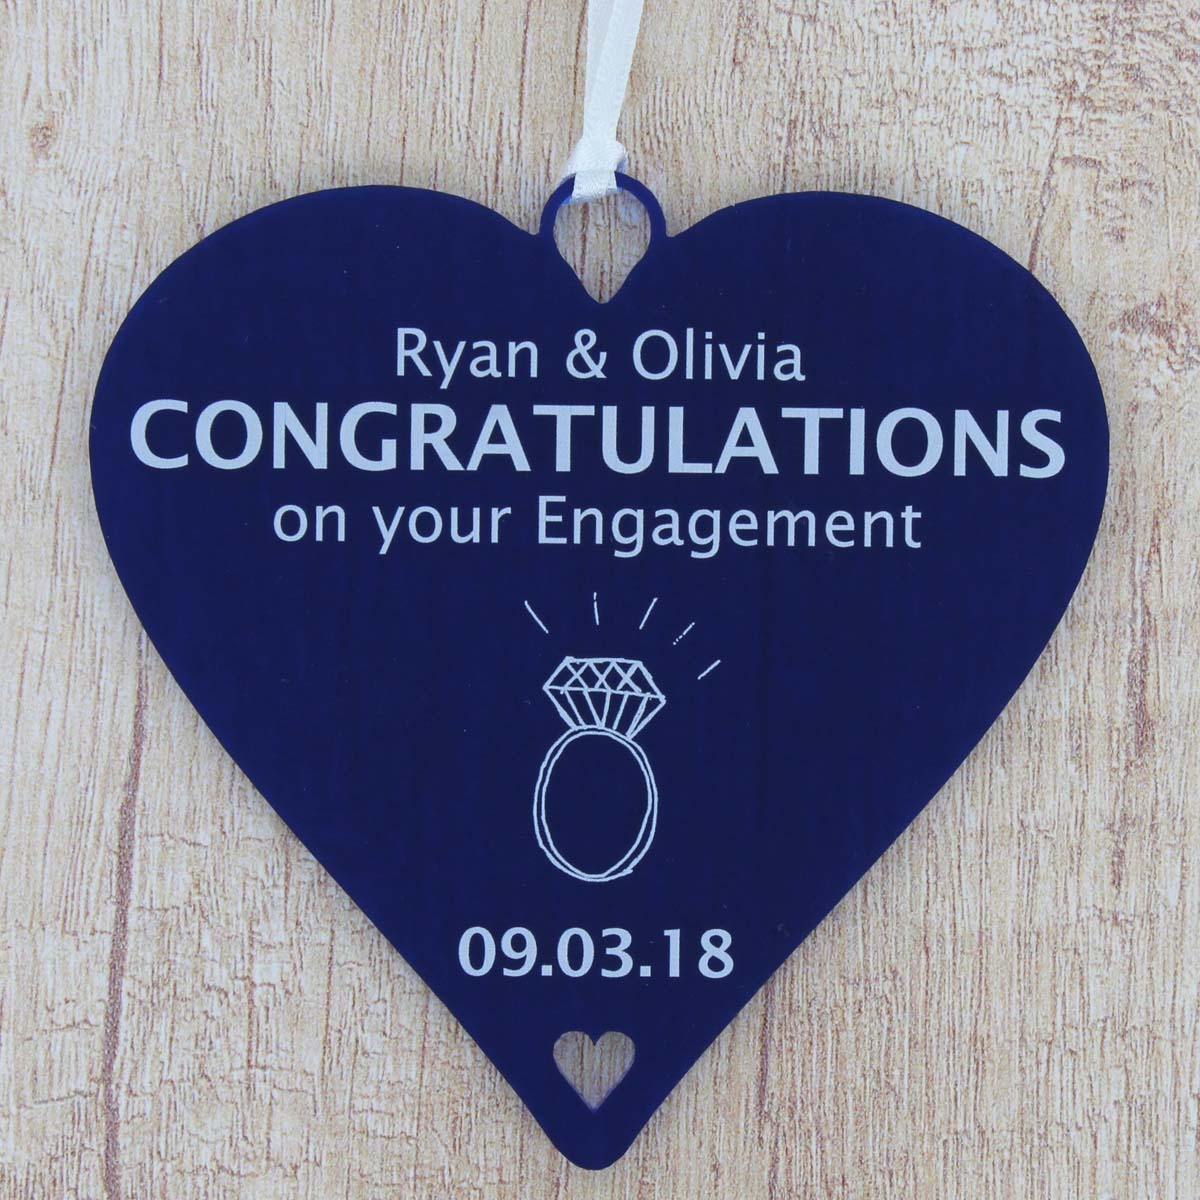 Personalised Engagement Gifts Congratulations on your Engagement Couples Gift - 10cm Heart